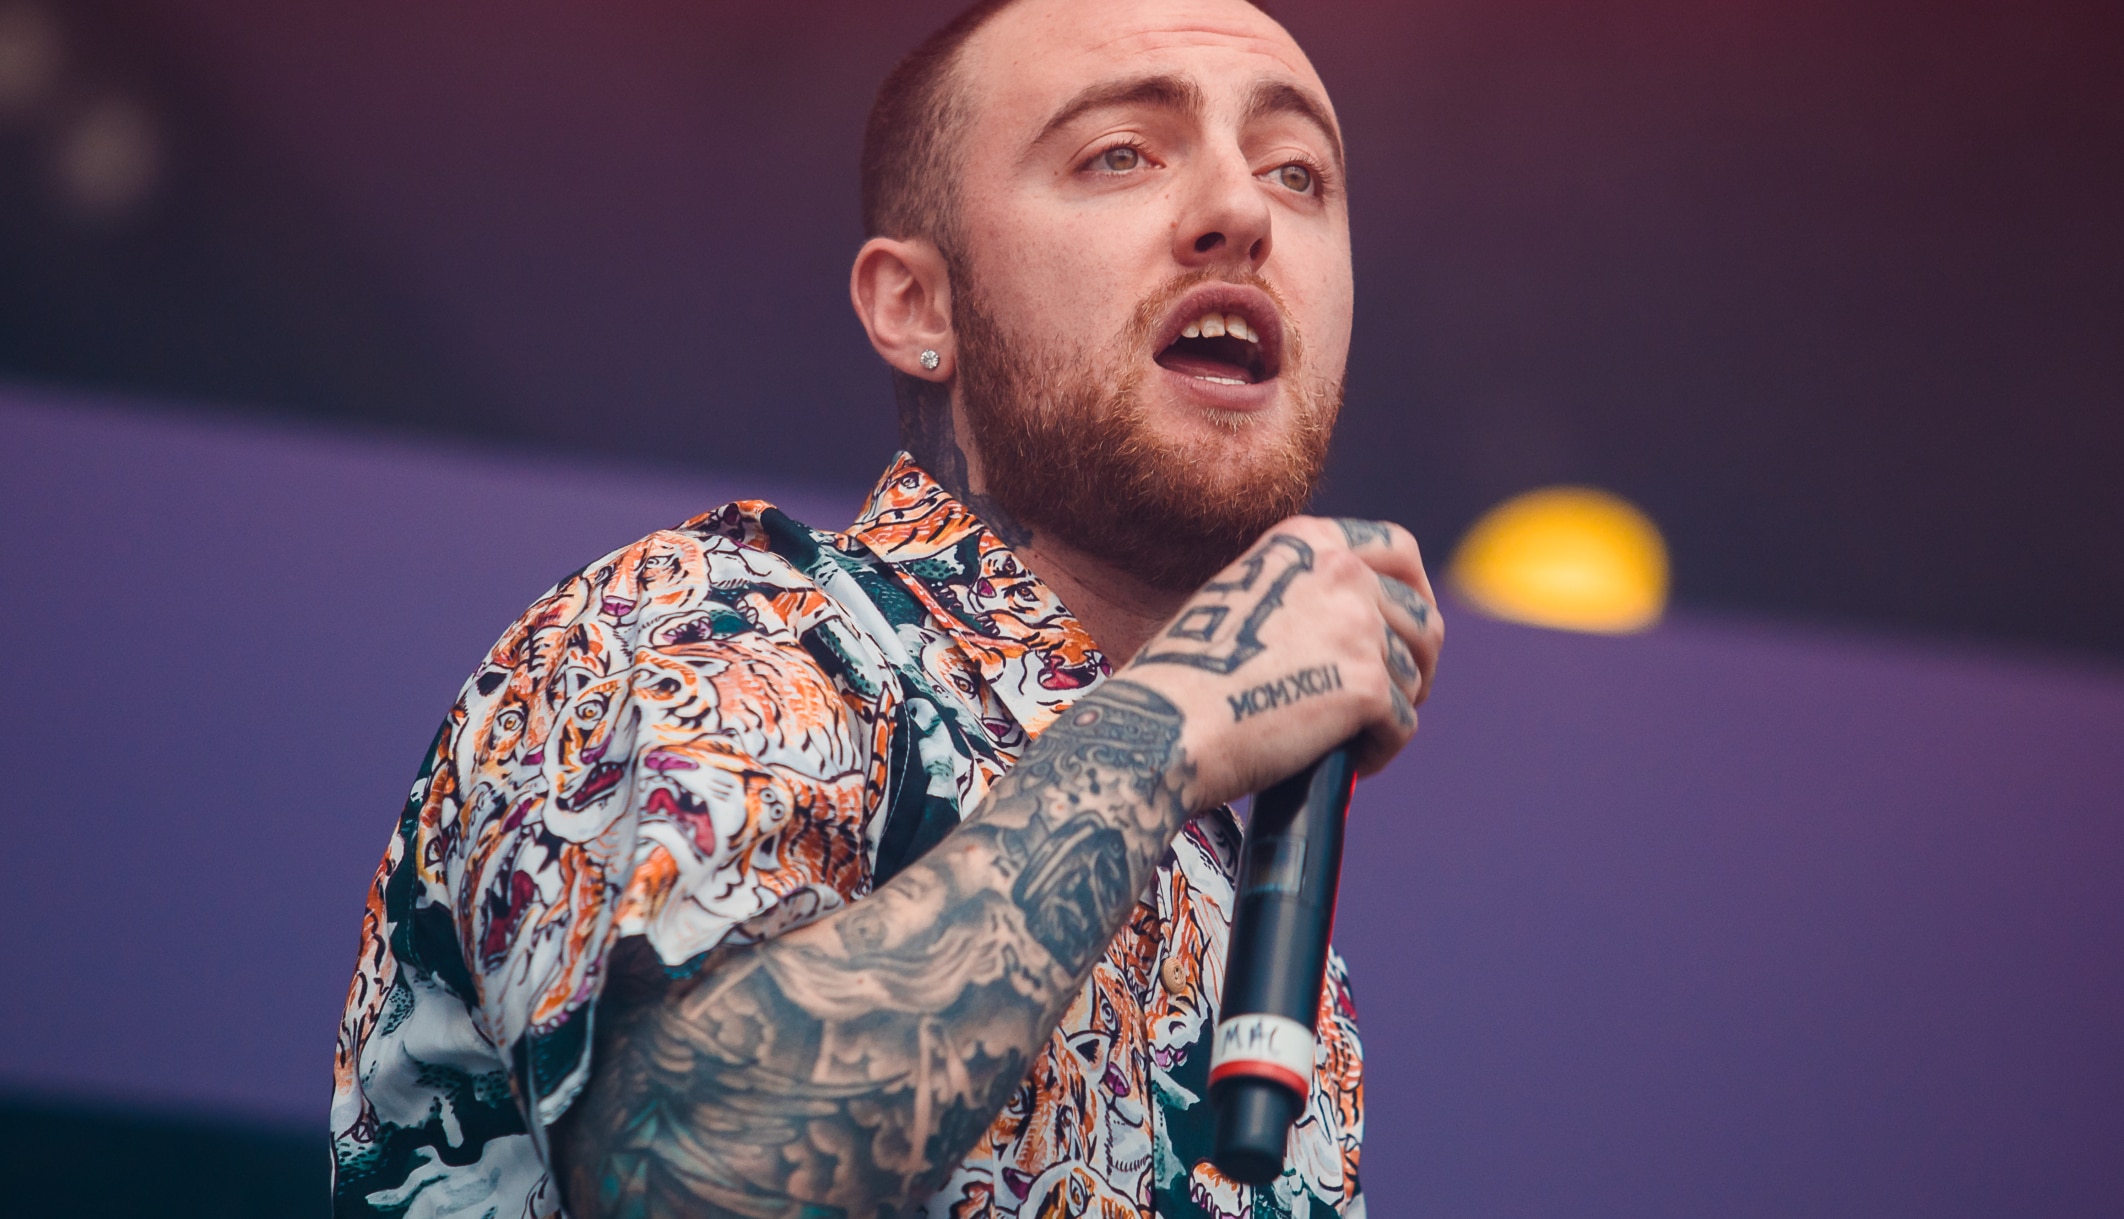 Mac Miller Hit With DUI Charge After Car Wreck Arrest | Very Real